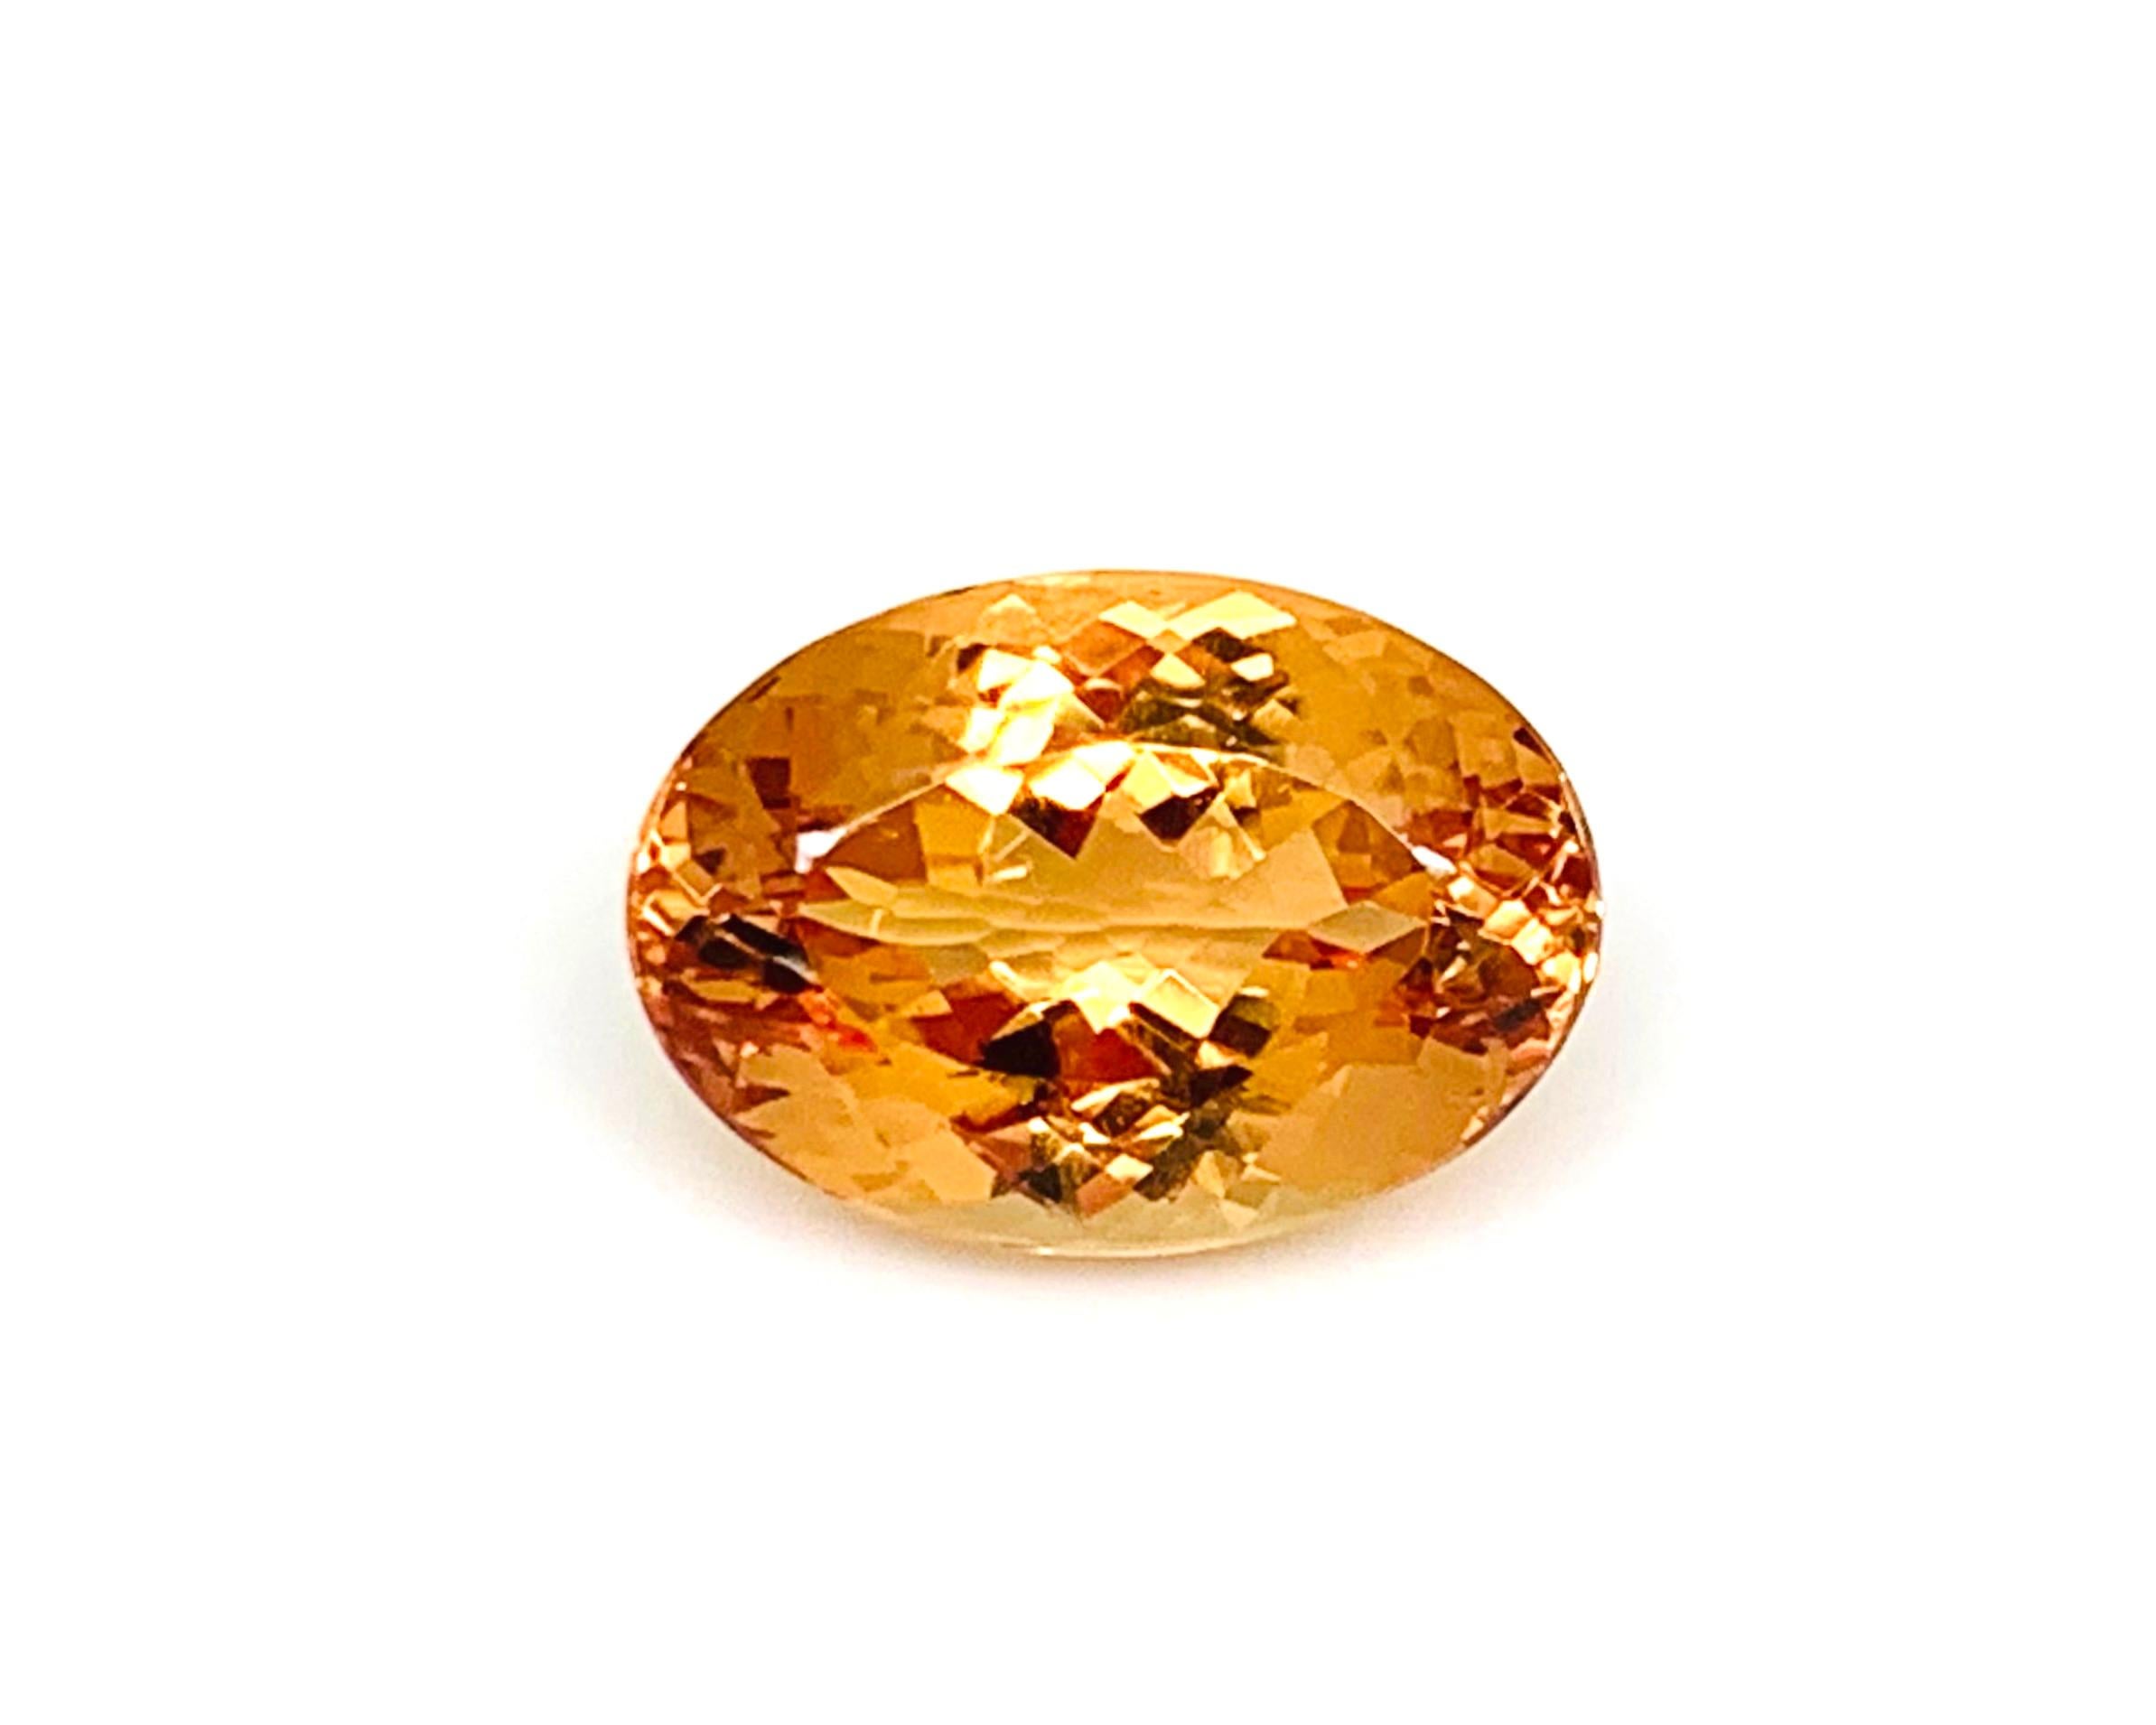 This beautiful 7.16 carat precious topaz has brilliant apricot-orange color and exceptional clarity! Measuring 13.43 x 9.40 x 7.08 millimeters, this beautifully well-proportioned oval is extremely well-cut and a versatile shape that will lend itself